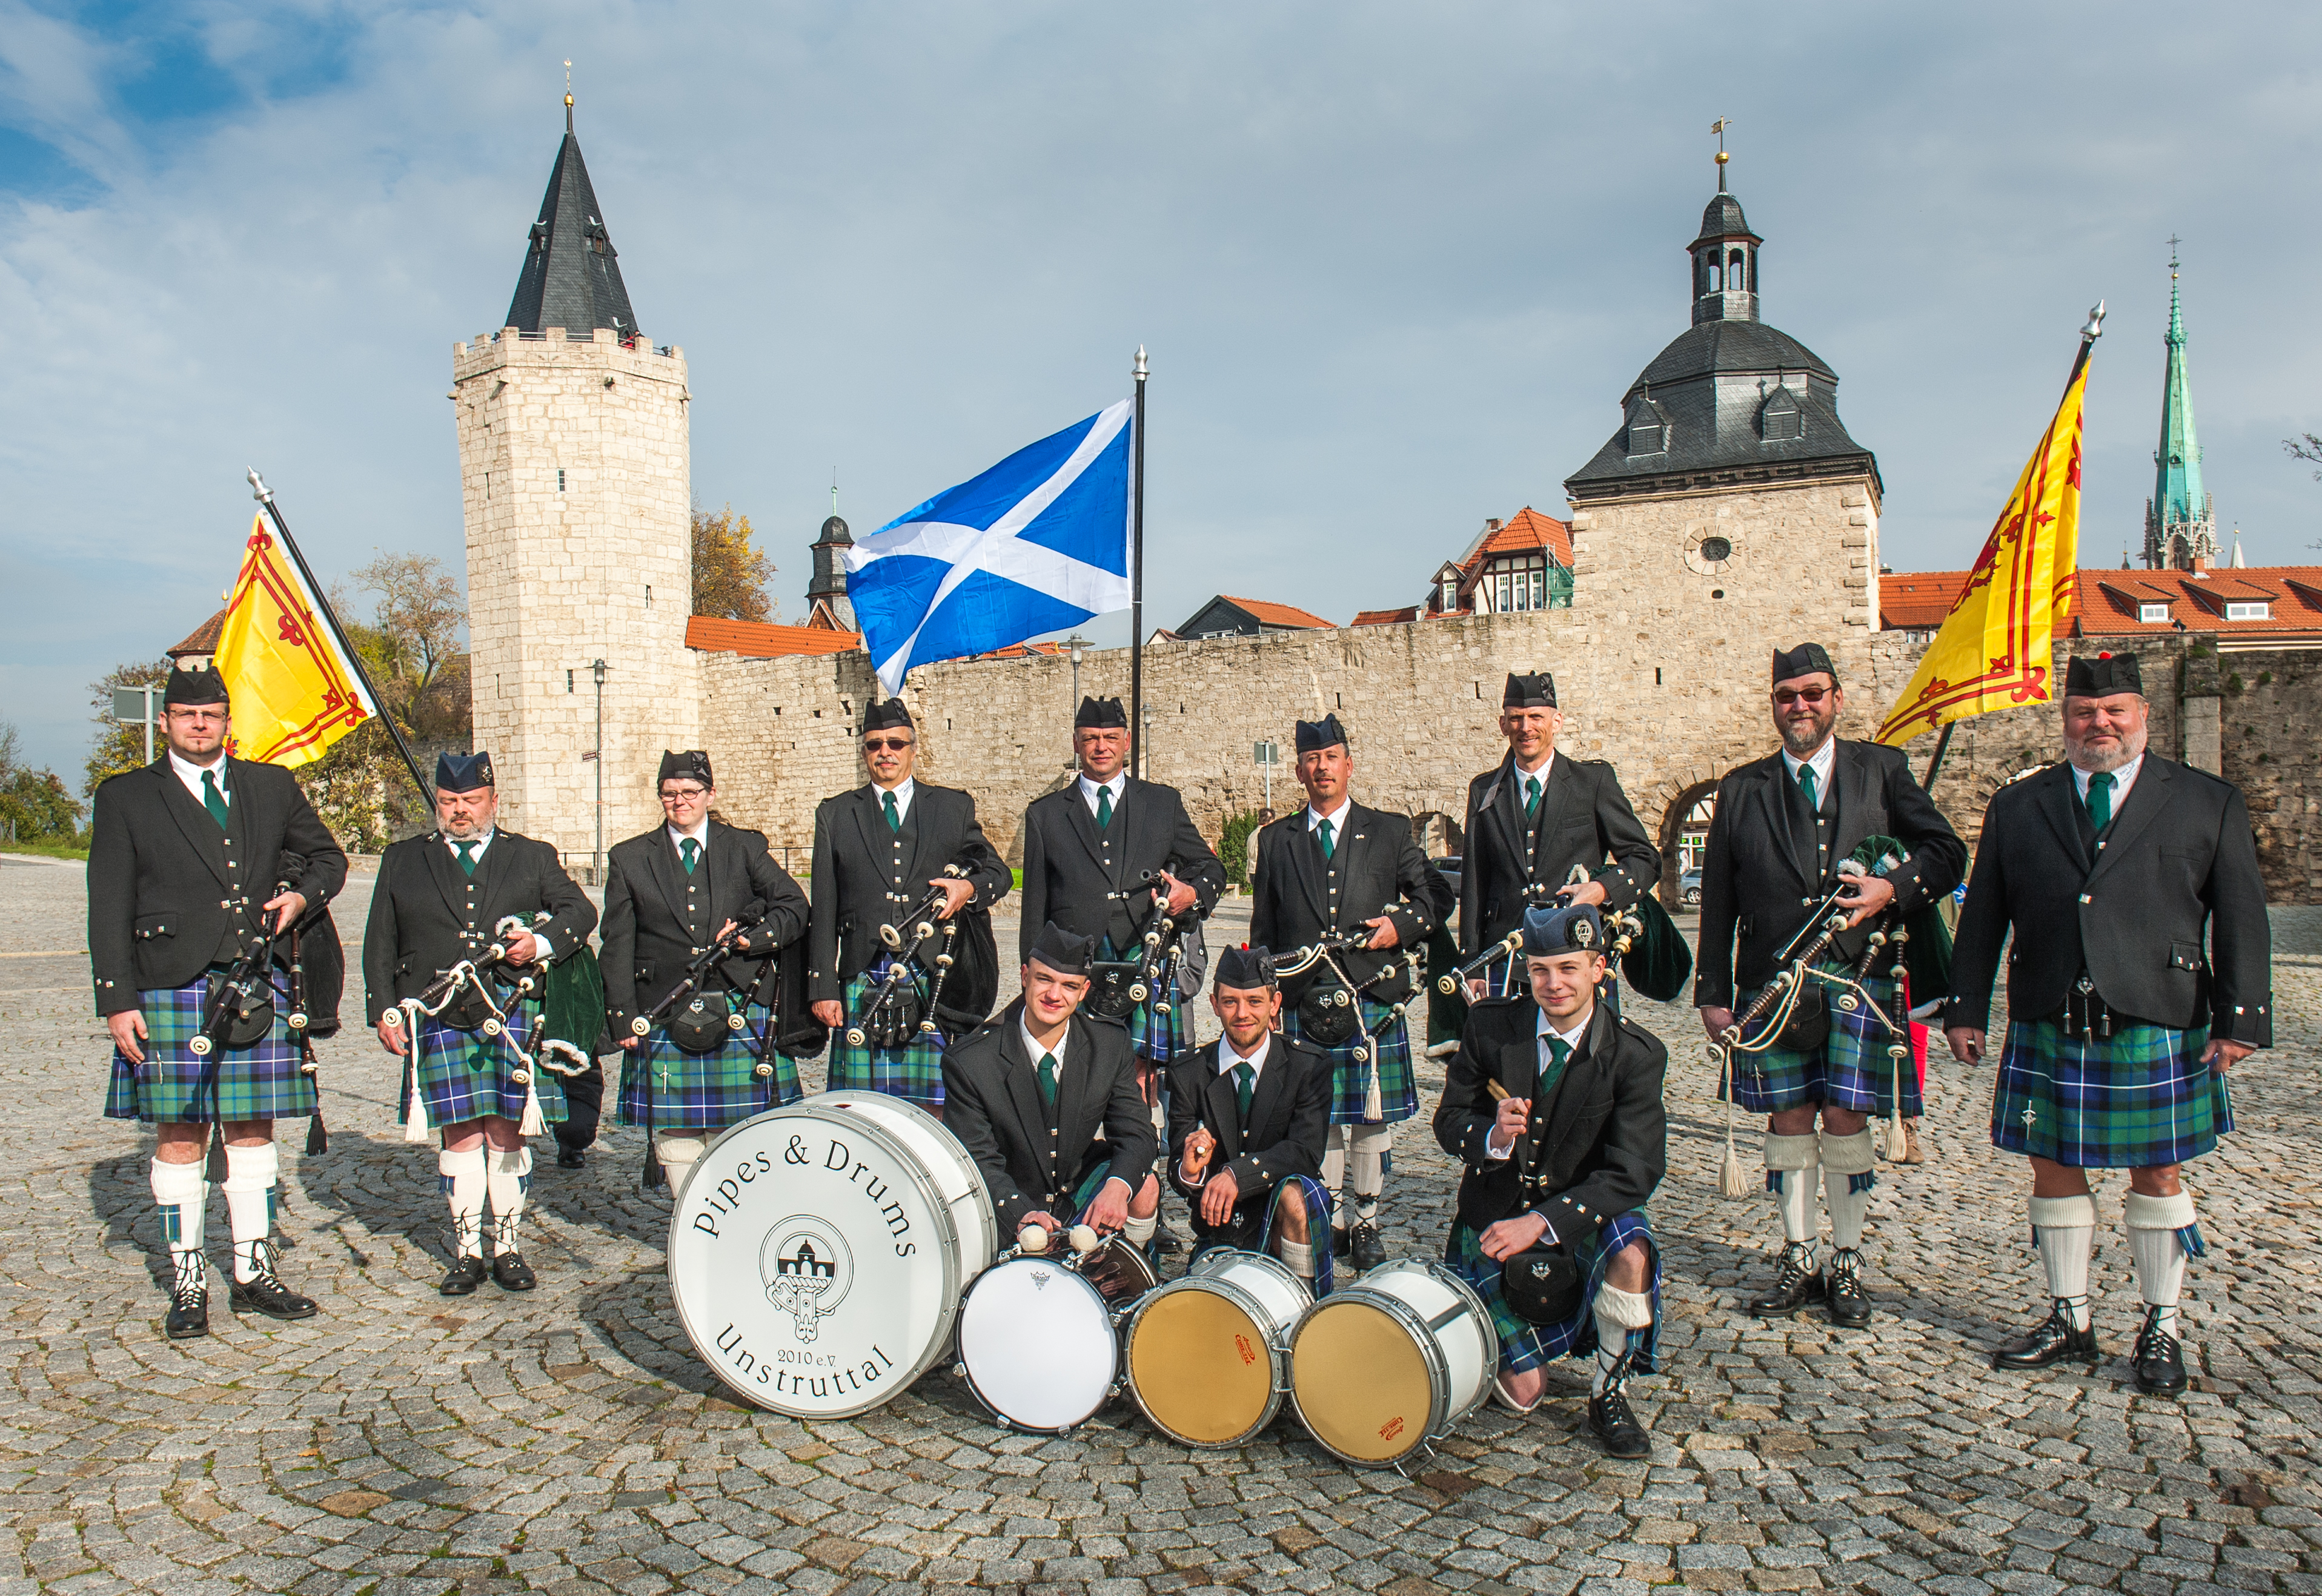 Pressefoto Pipes and Drums Unstruttal